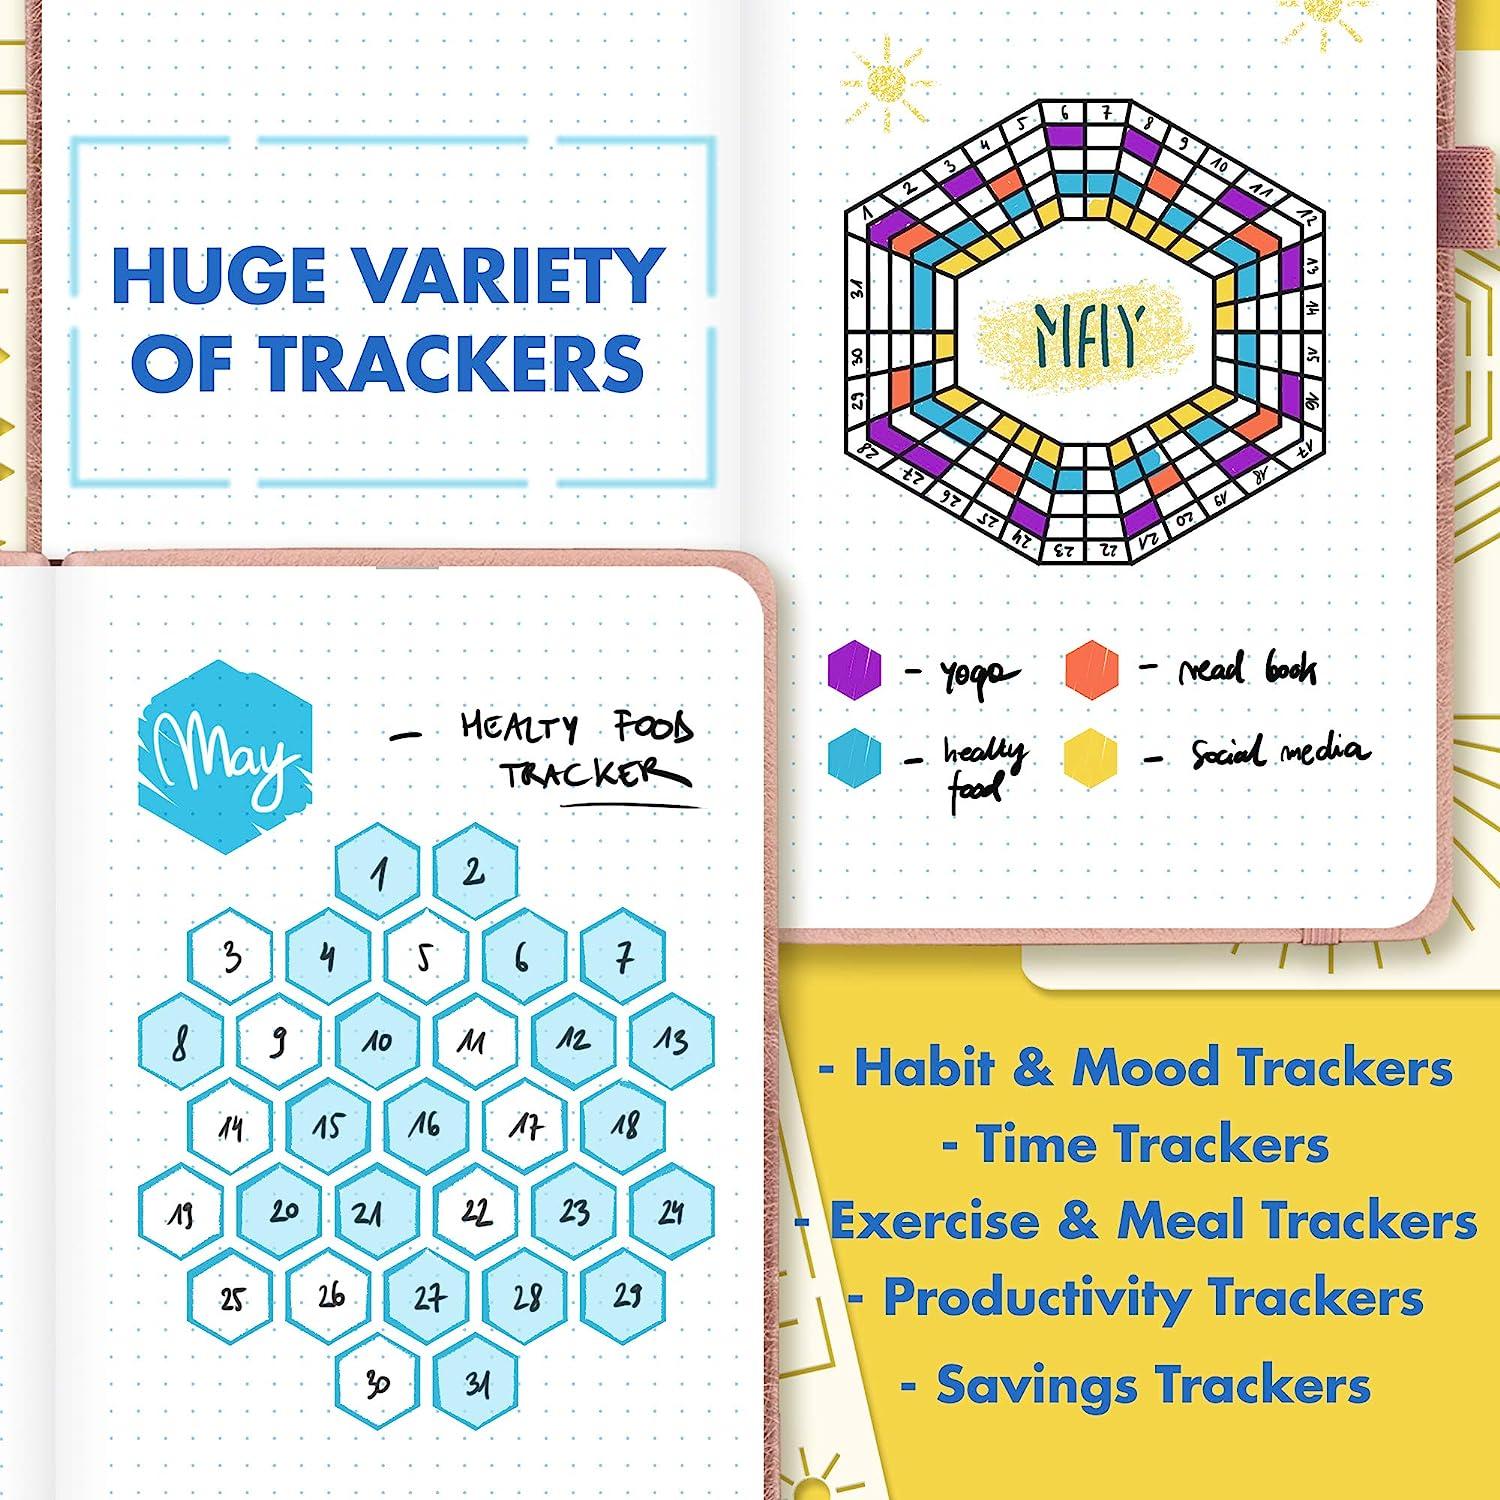 Easy to Use Stencil Set for Dotted Journals - Time Saving Planner  Accessories/Supplies Kit Makes Creating Layouts Easy - Incl. Bullet Point  Checklists, Daily/Weekly/Monthly Calendars